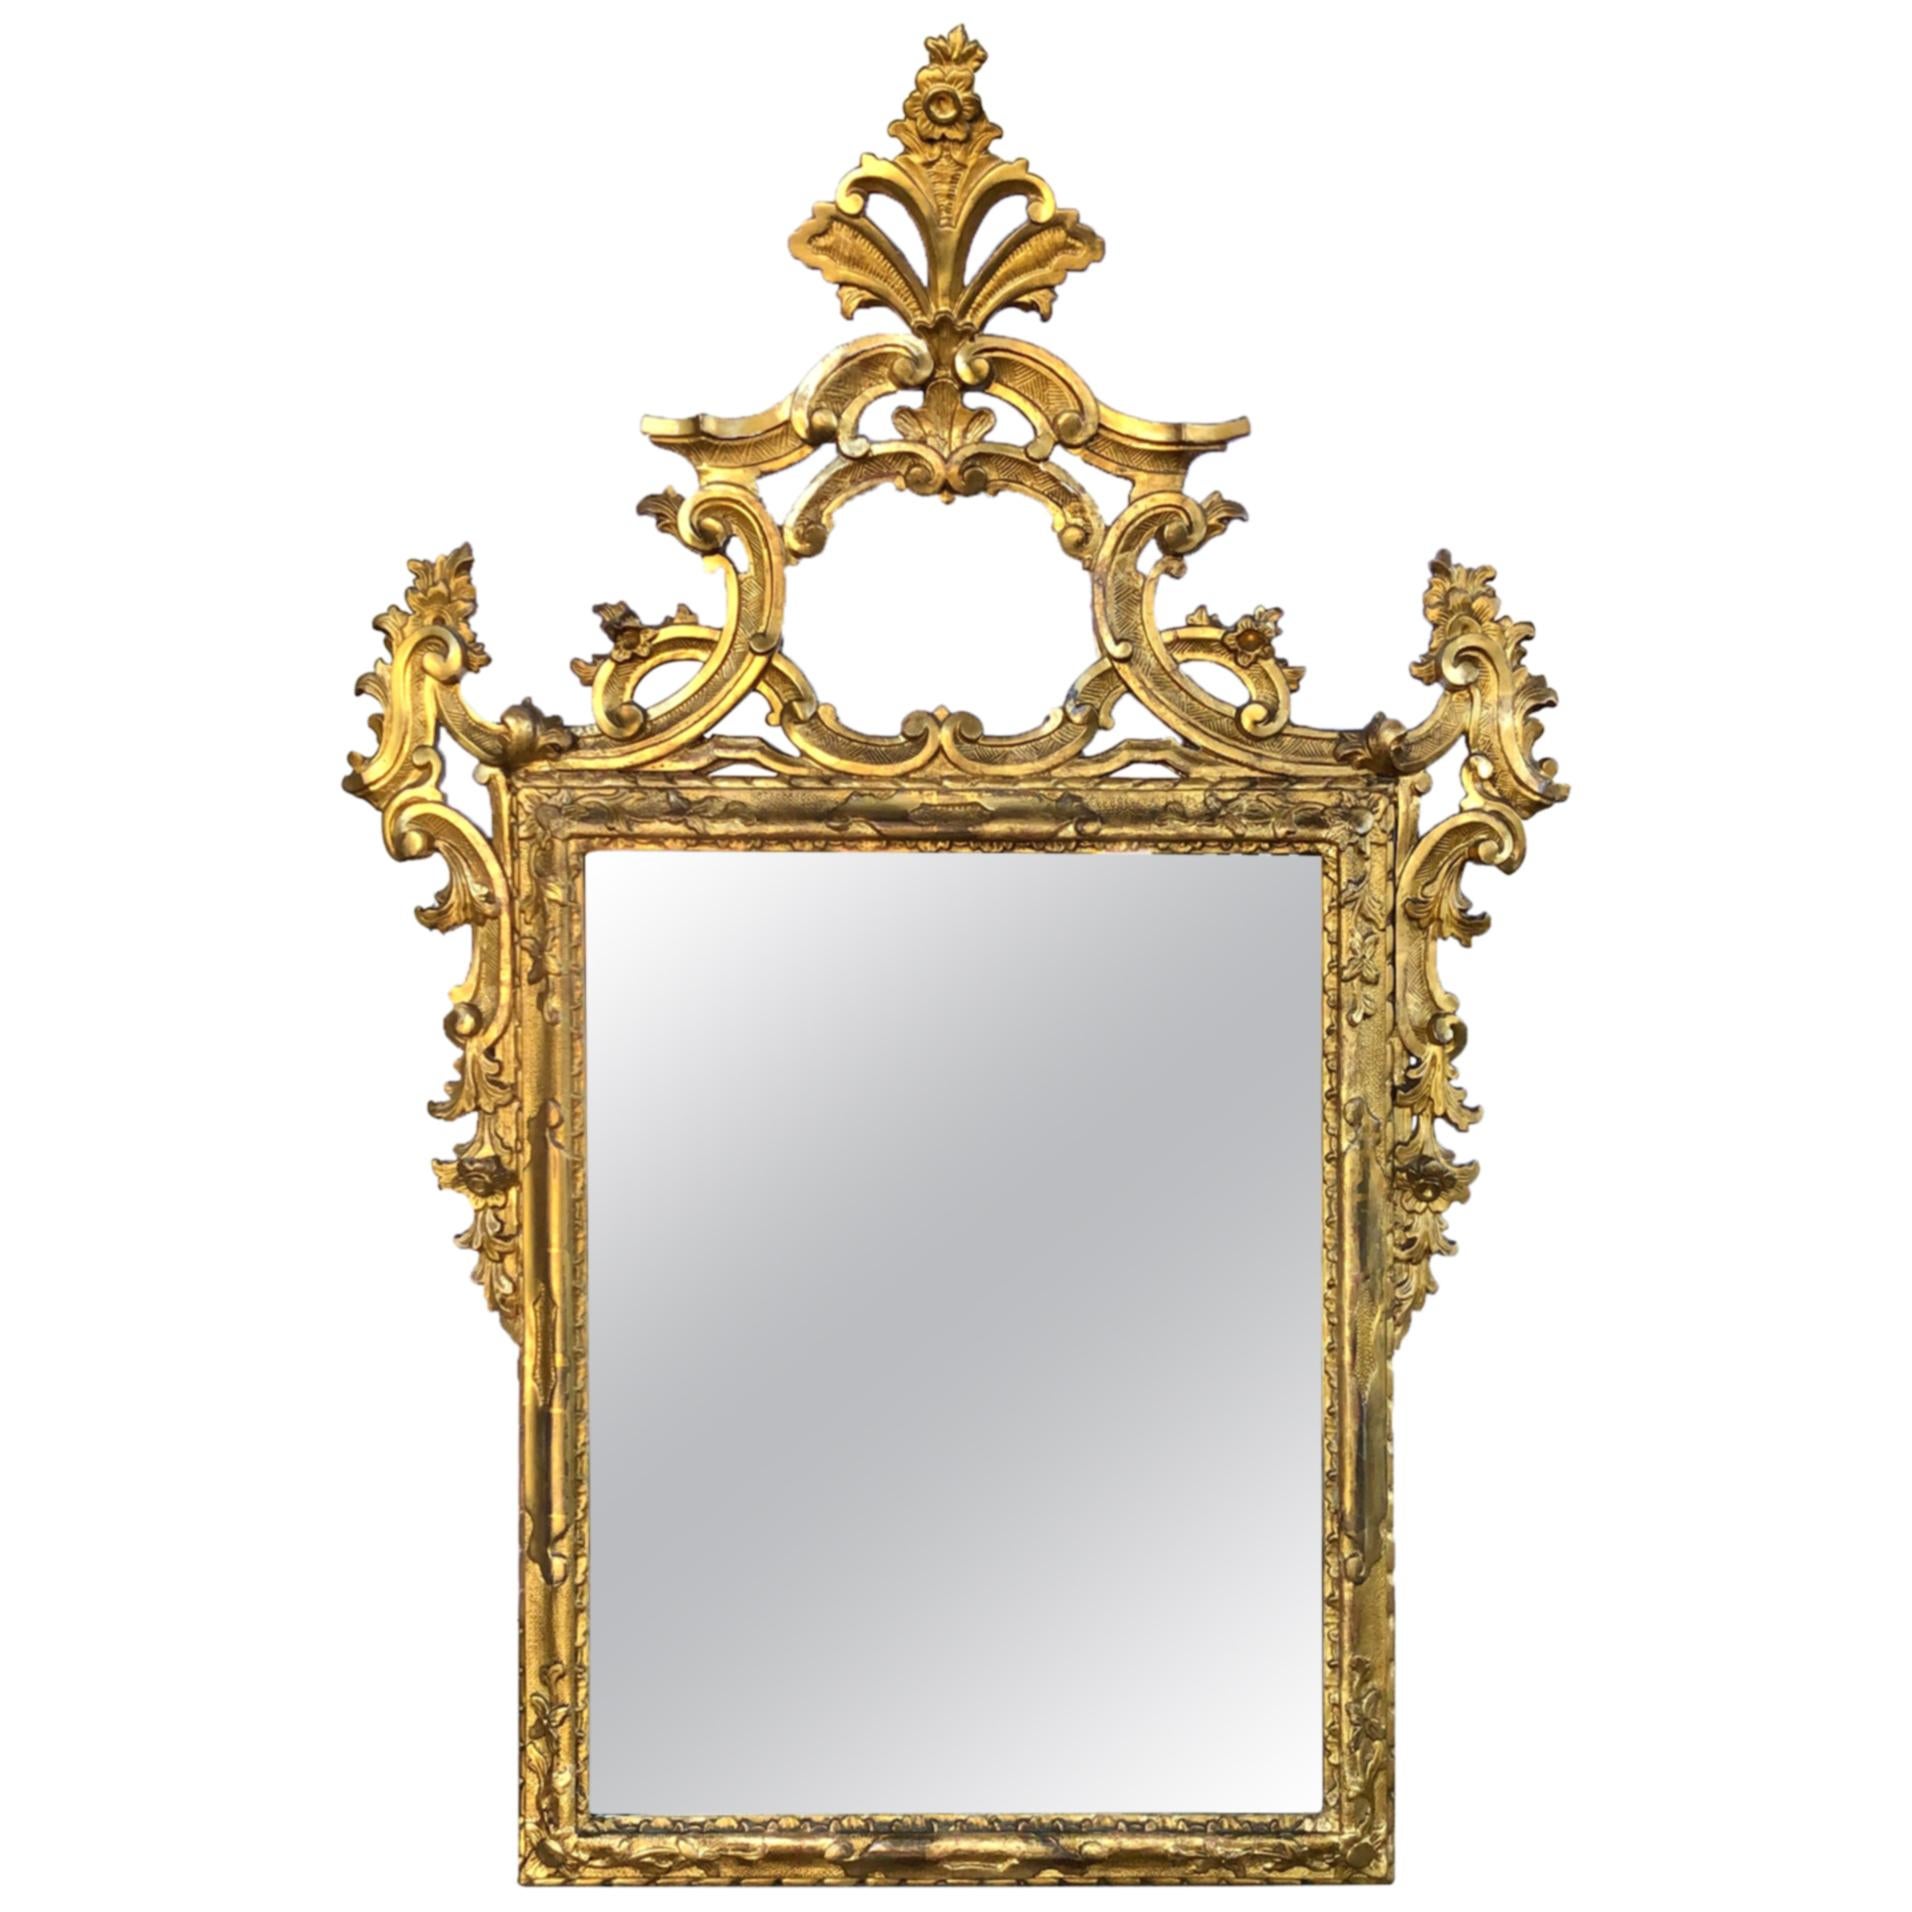 Well-Carved English George II Style Giltwood Mirror with Dramatic Crest